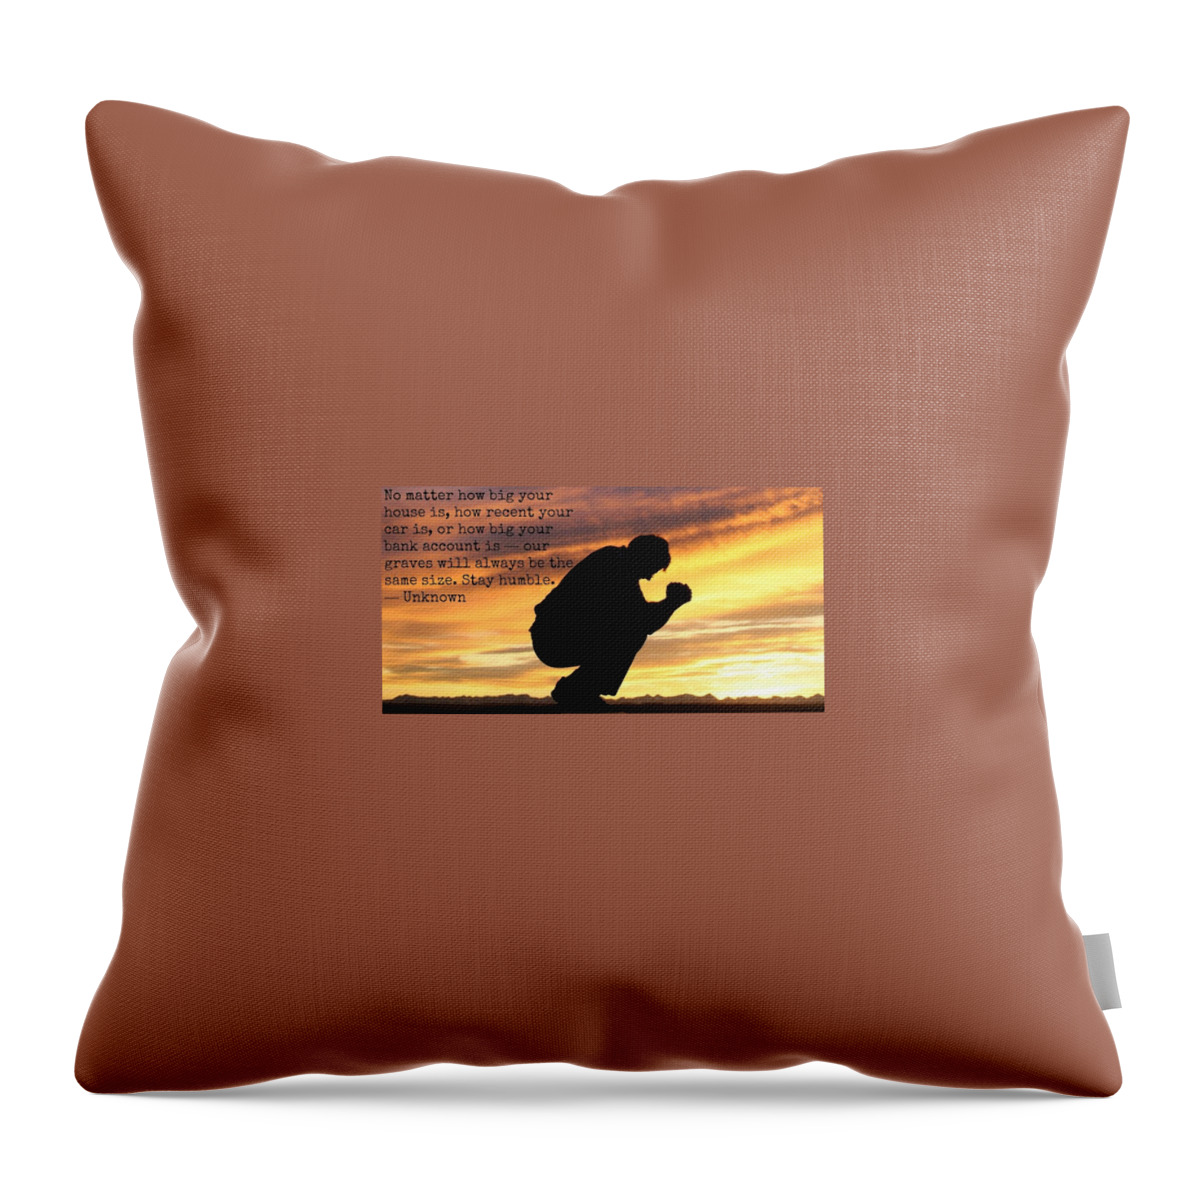  Throw Pillow featuring the photograph Lifeq414 by David Norman